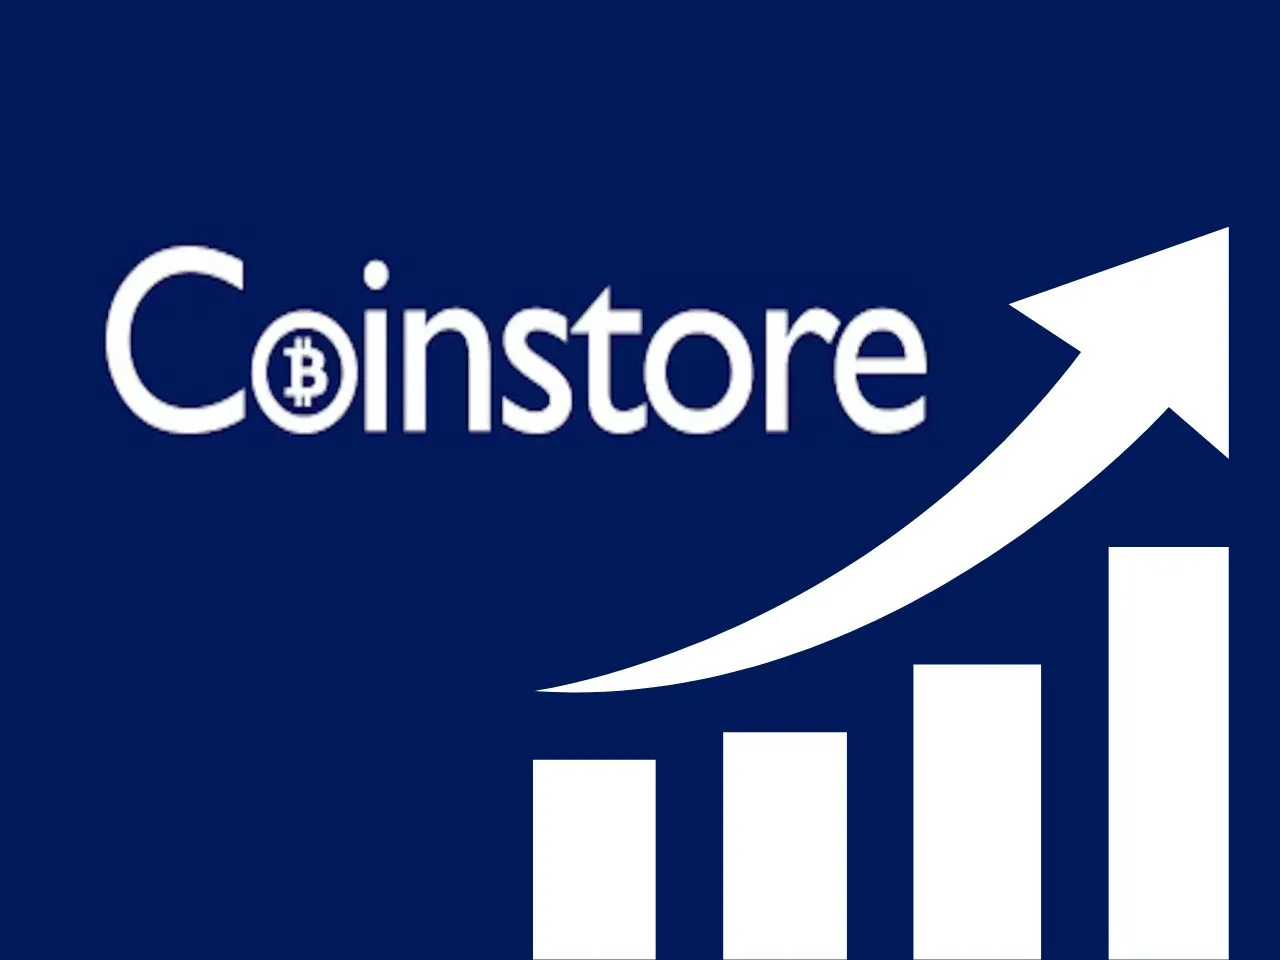 Coinstore Achieves 3.6 Million Users, Reinforces Leading Position